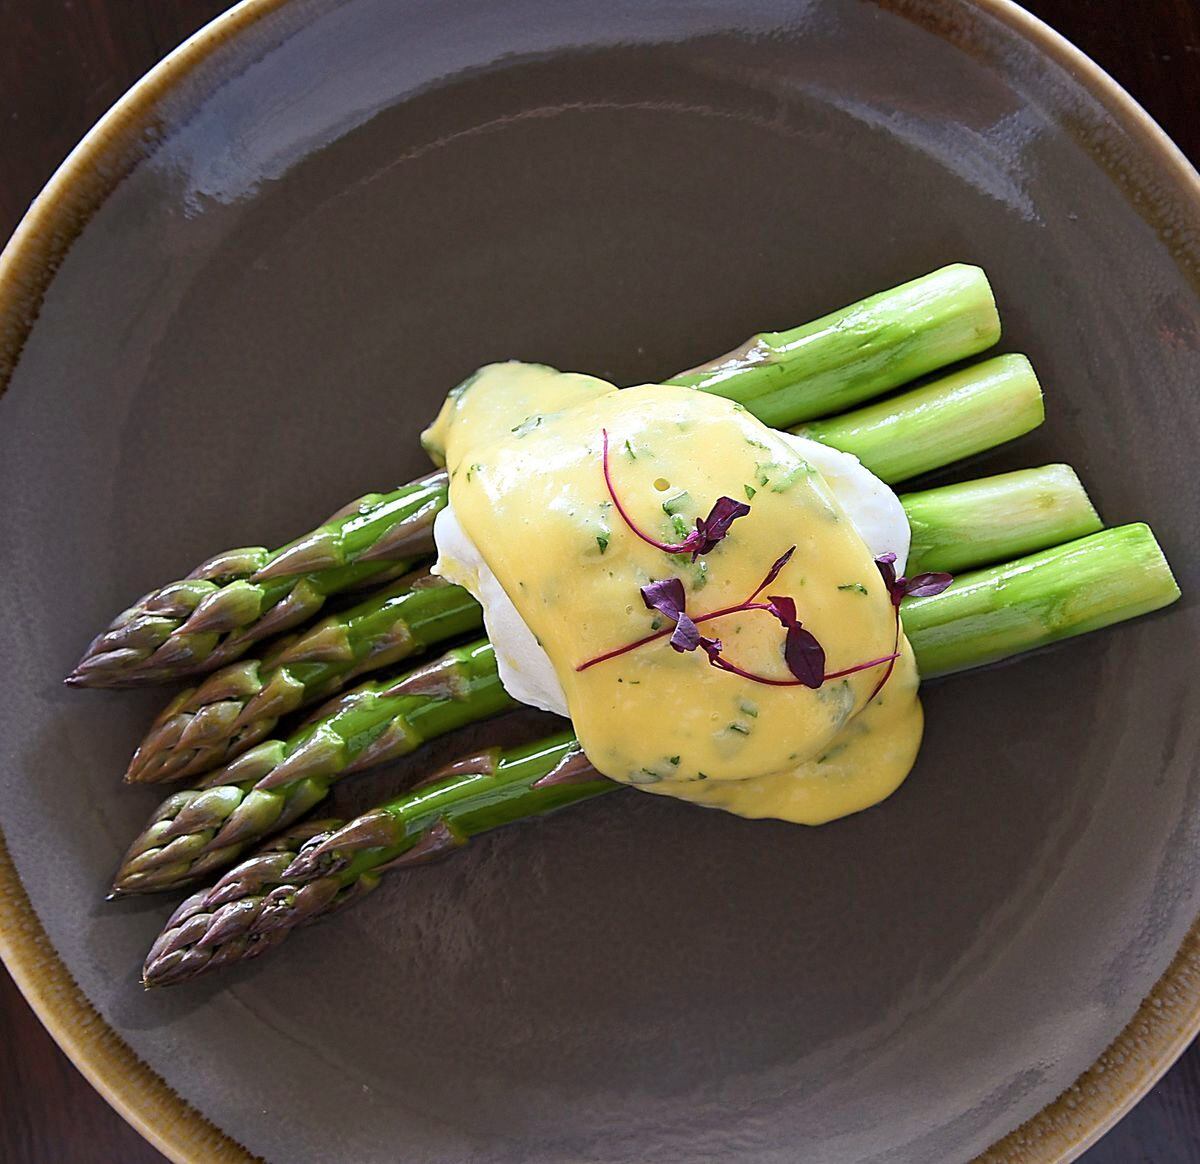 Golden glory – asparagus with a poached egg